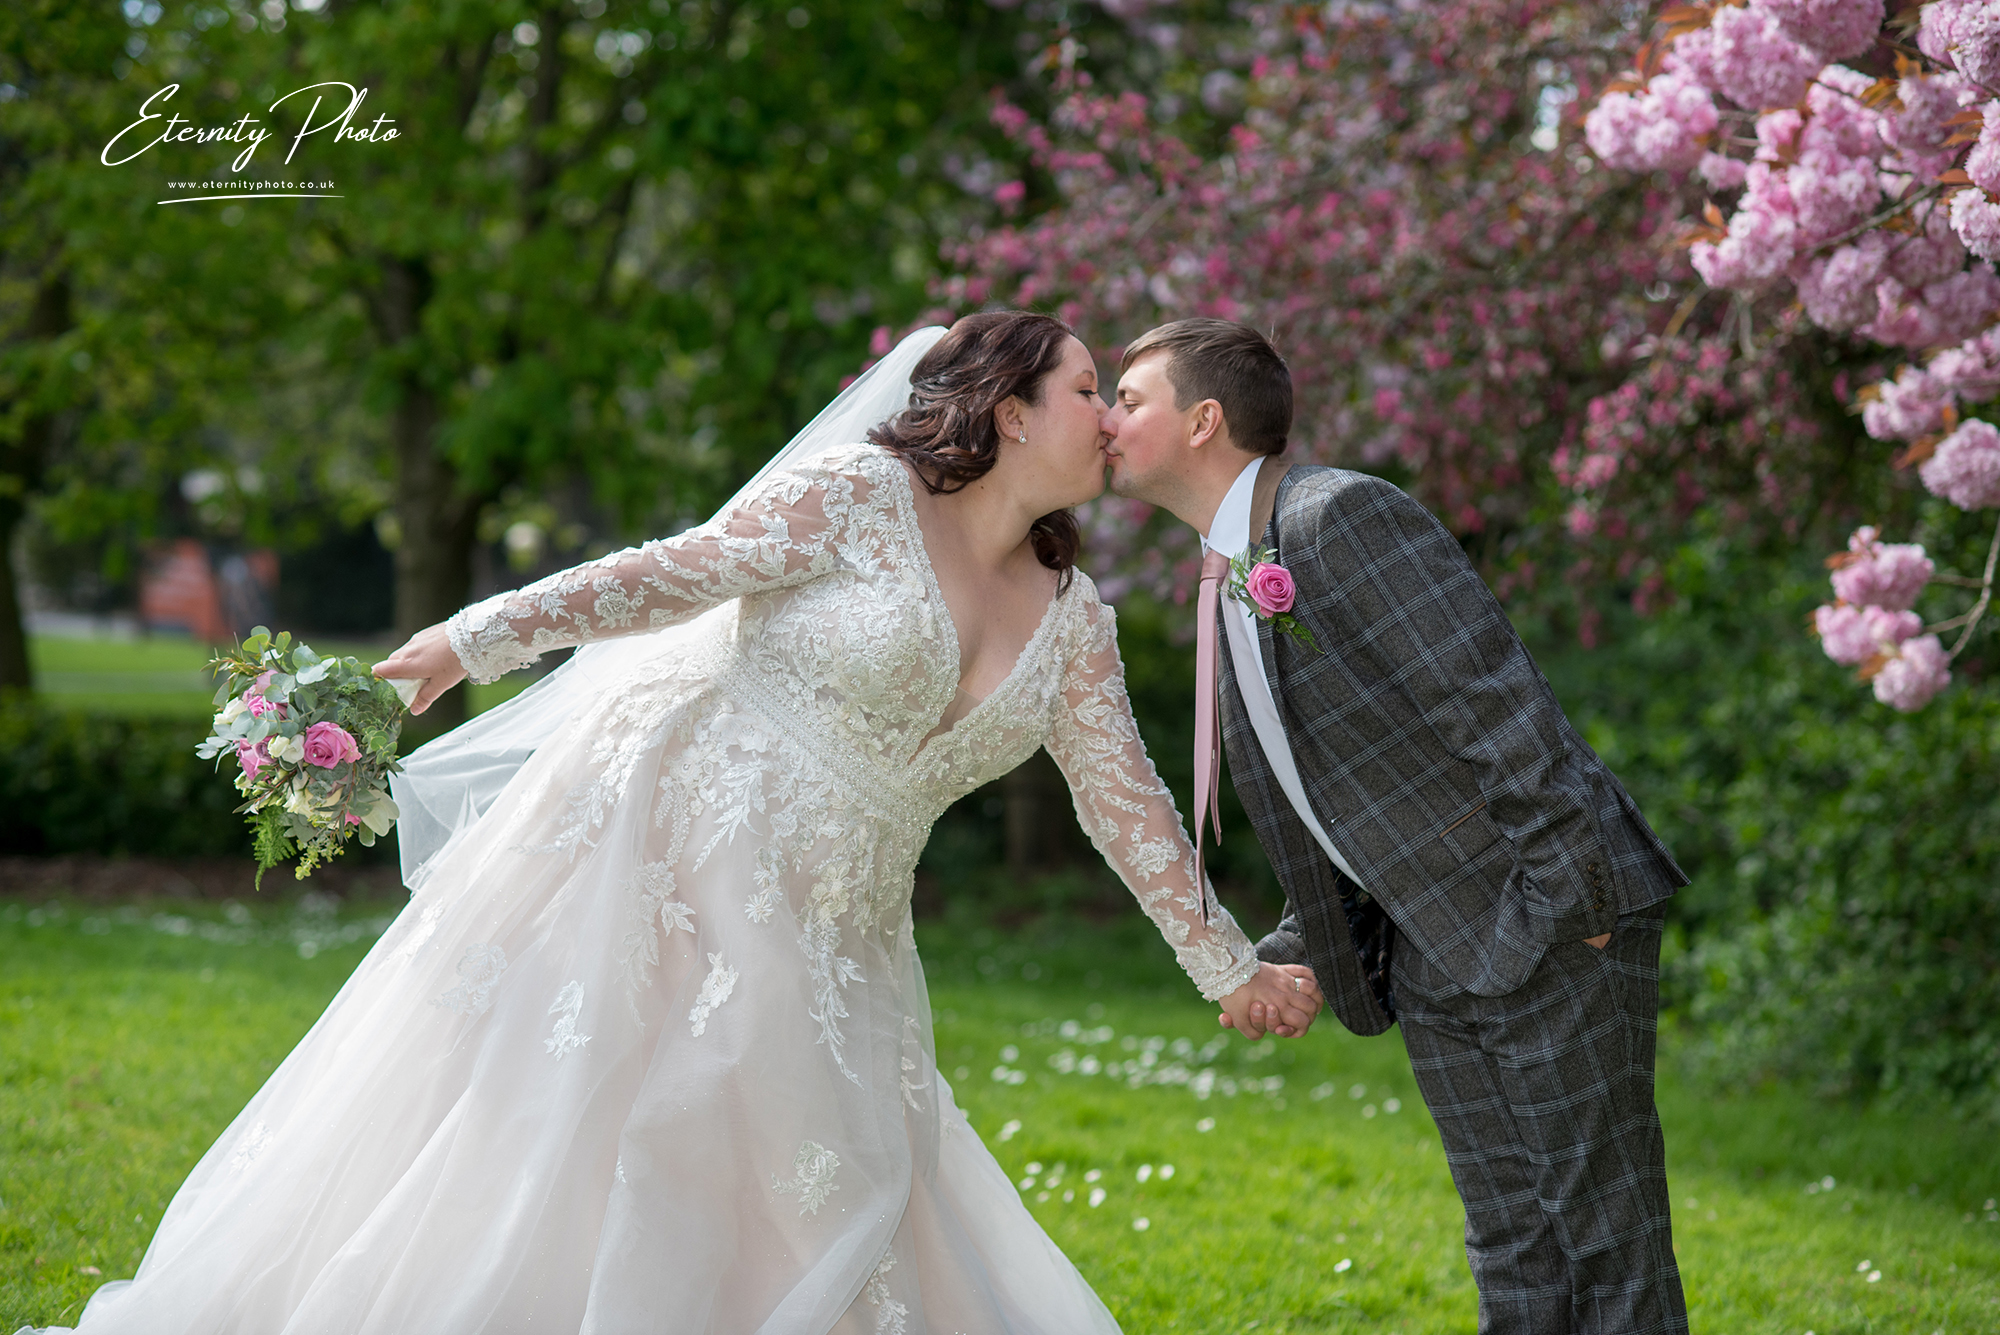 Bride and groom kissing by blossoming trees at park.